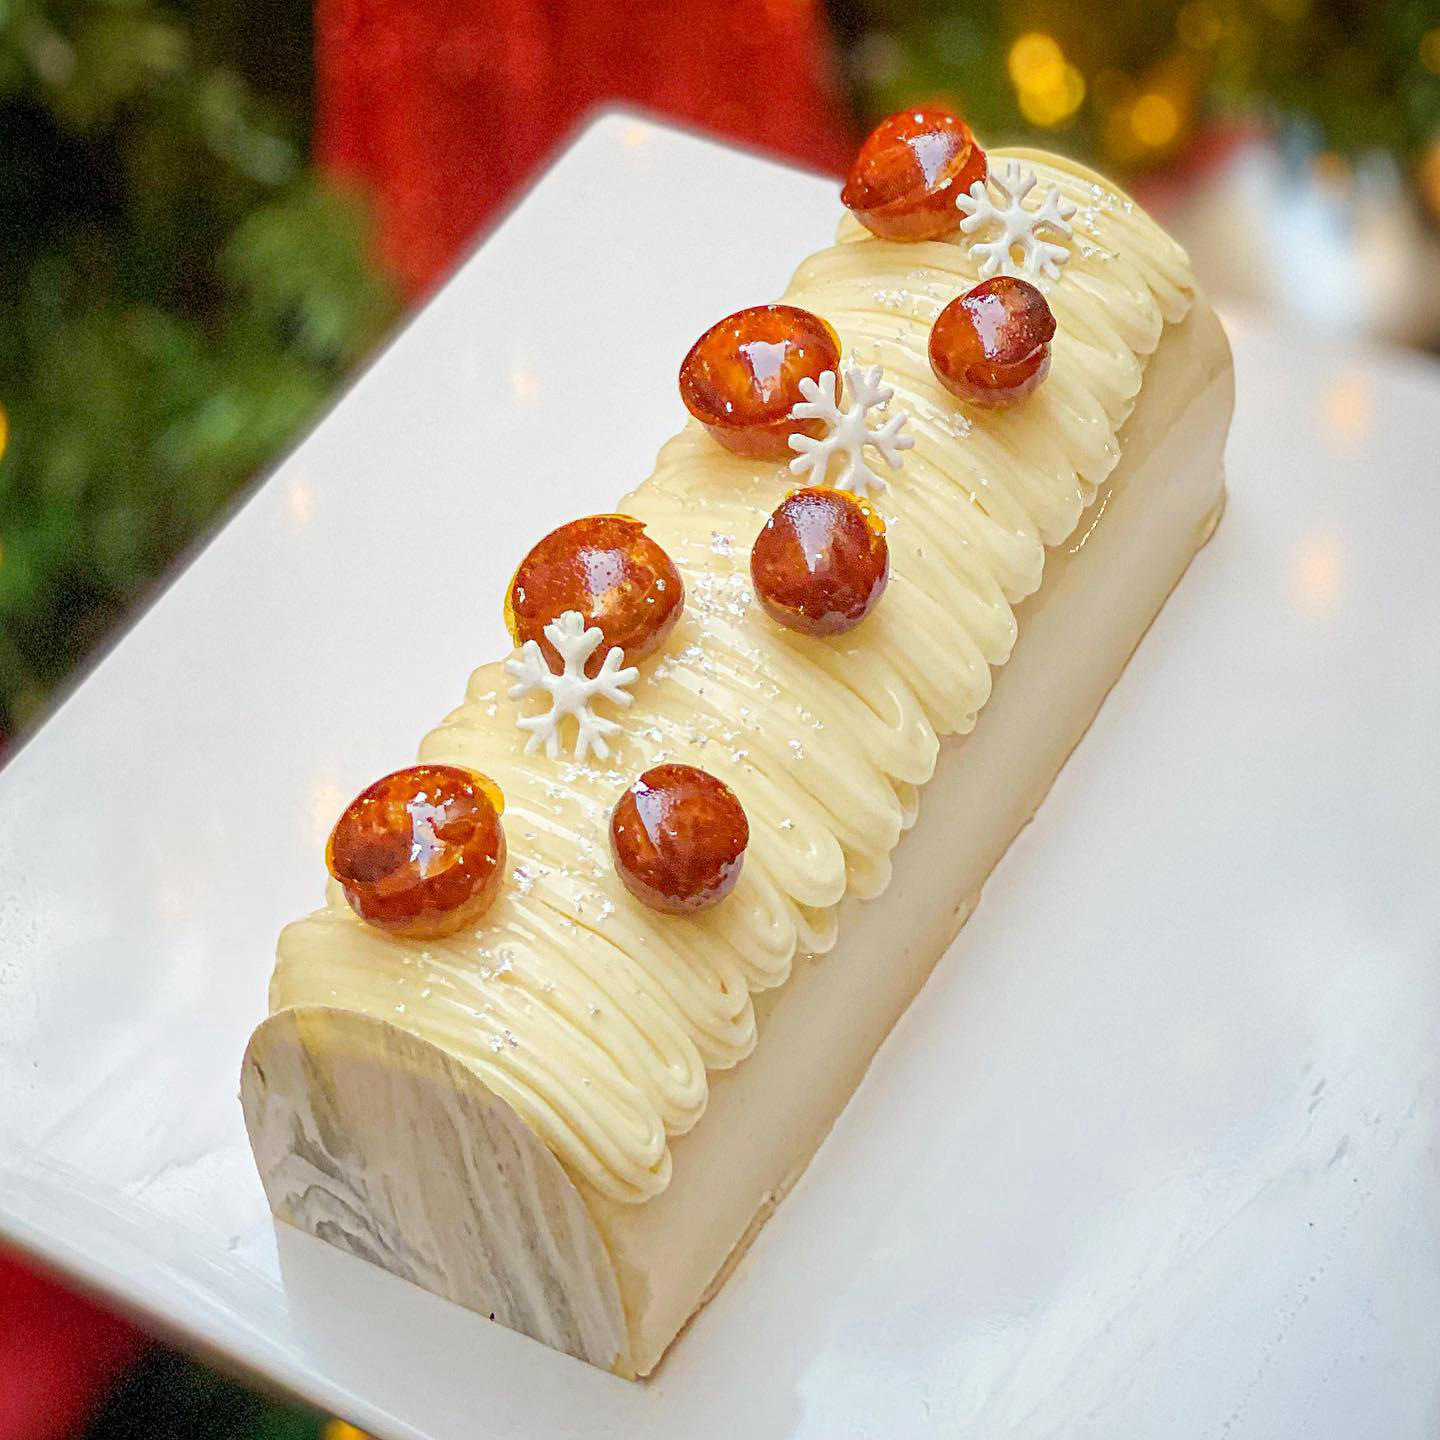 image  1 This is our new Buche de Noel at #bachourmiami for pre order to pick up Dec 23-24 , the first one is